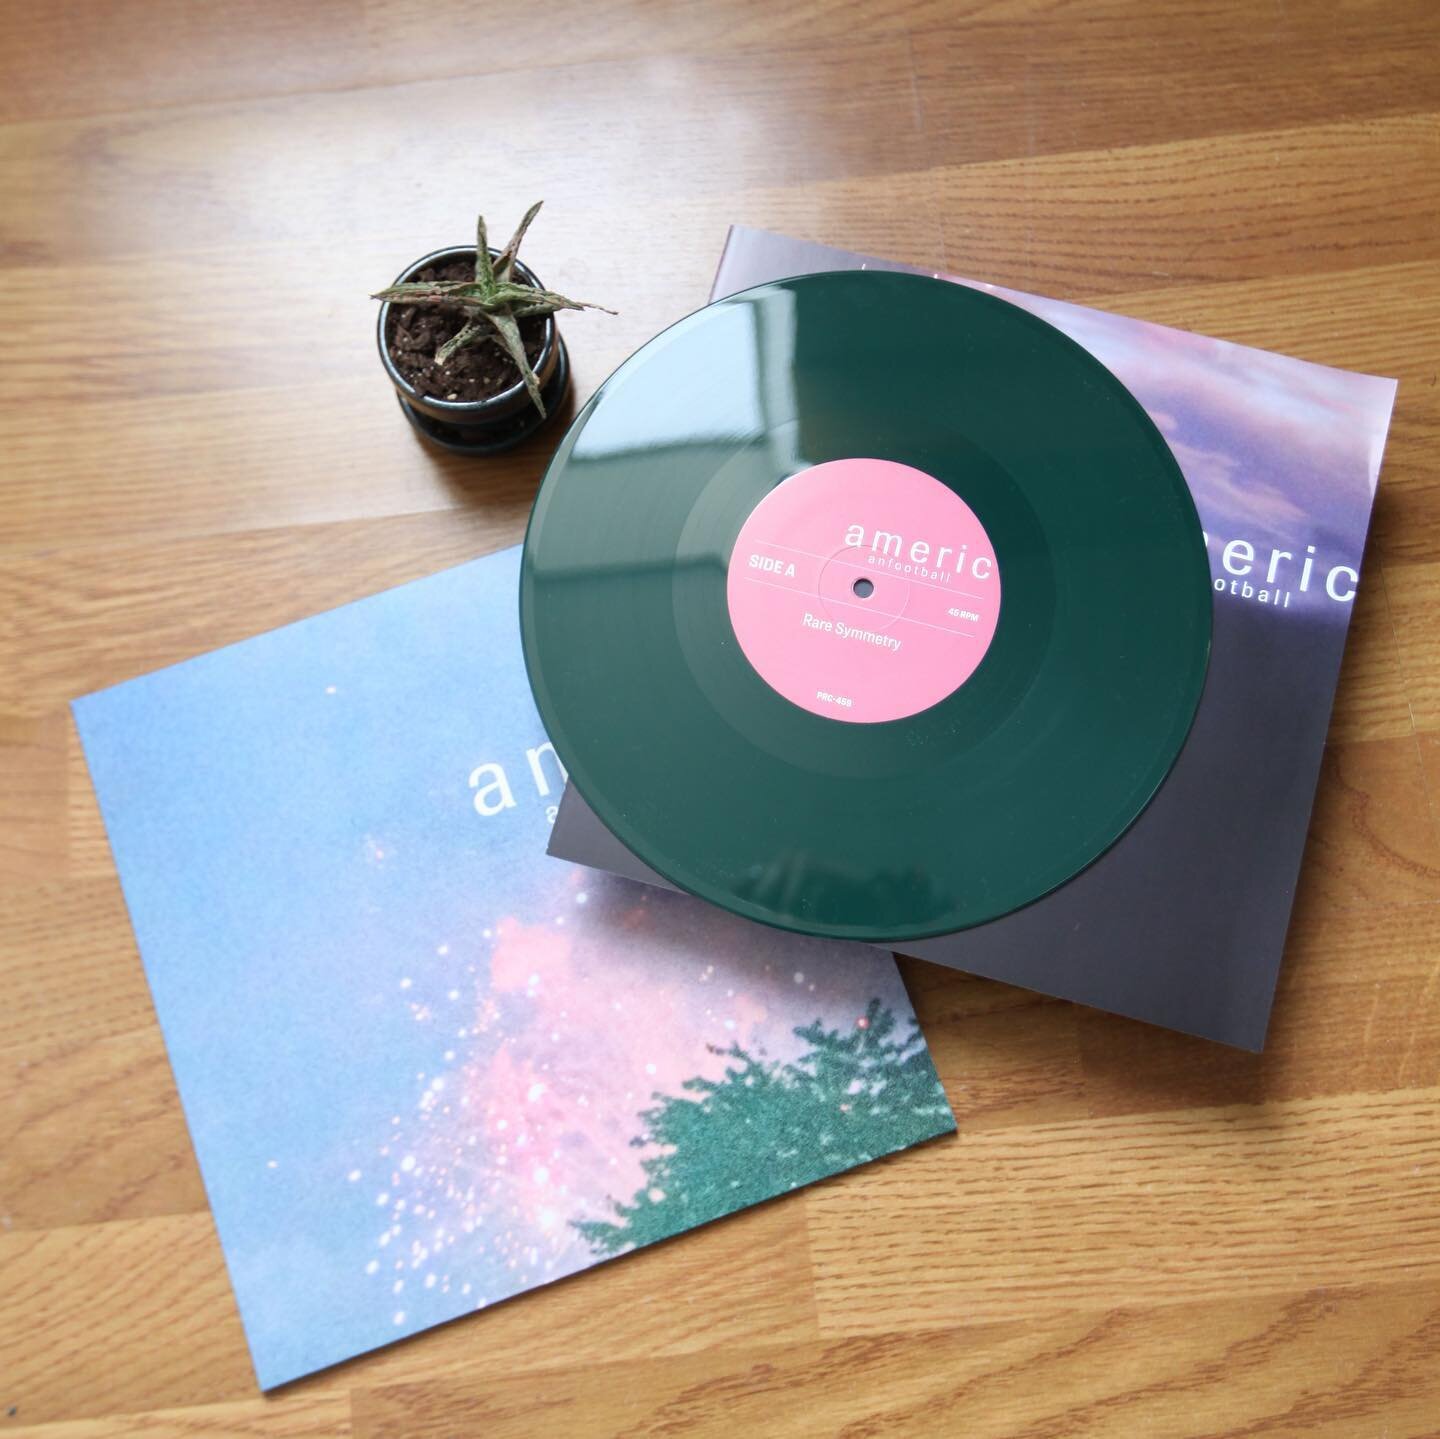 Rare Symmetry / Fade Into You 10&rdquo; is out today! 

**edit: early bird edition (dark green) is now sold out but the pink variant is still available!